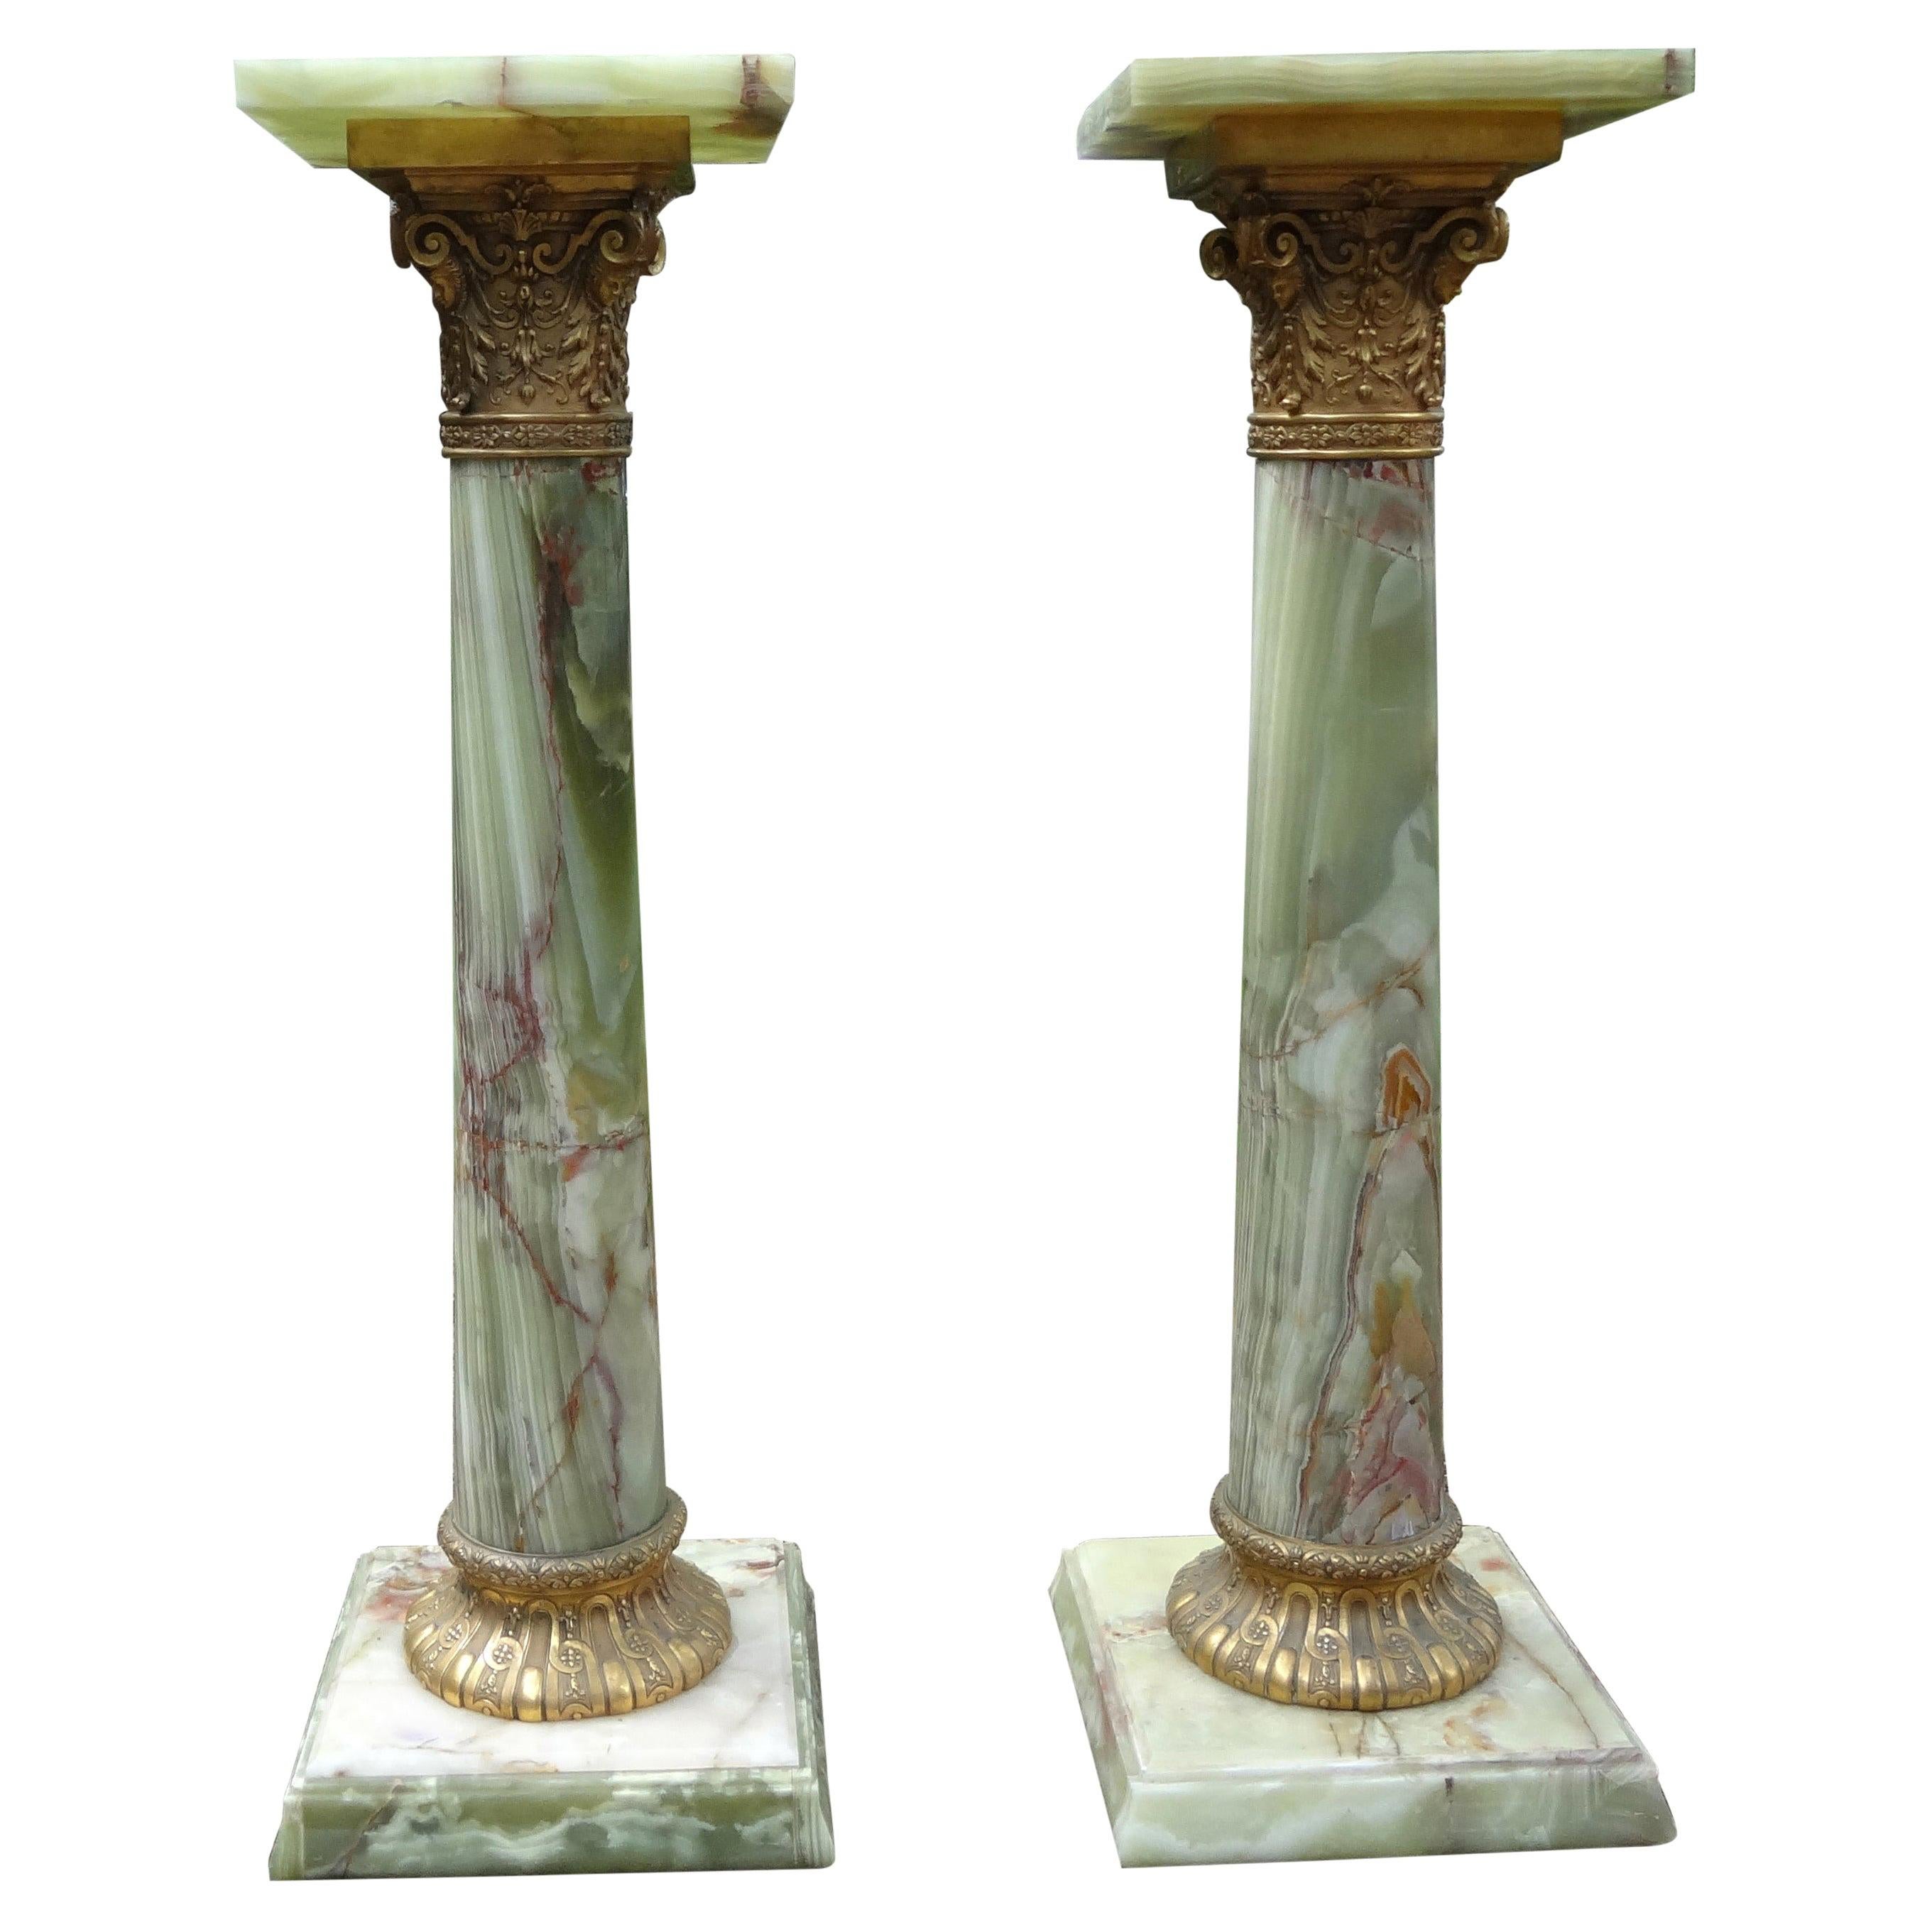 Pair of 19th Century French Onyx and Bronze Pedestals